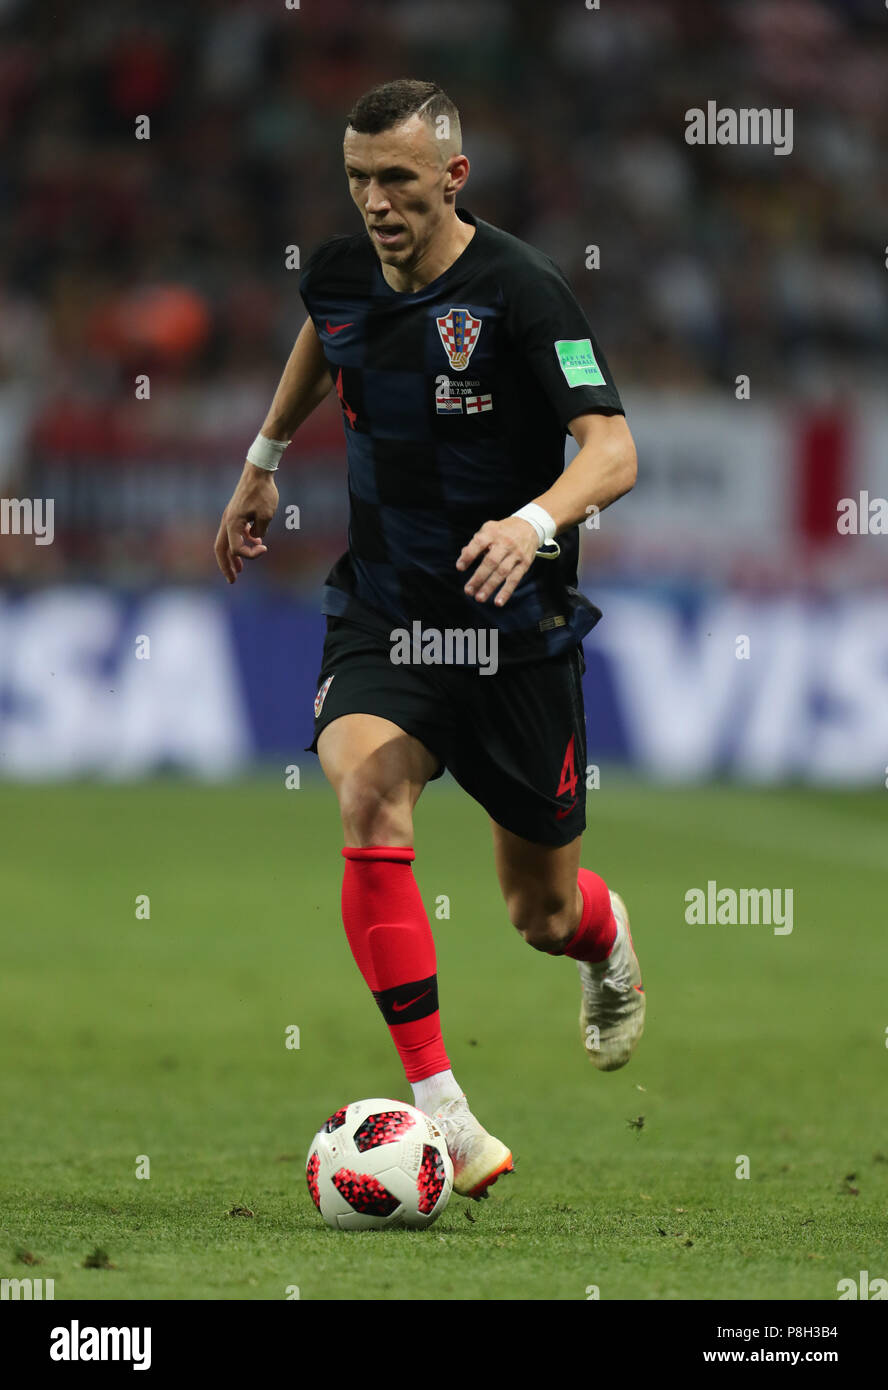 Ivan Perisic  CROATIA V ENGLAND  CROATIA V ENGLAND , 2018 FIFA WORLD CUP RUSSIA  11 July 2018  GBC9551  2018 FIFA World Cup Russia, Semi Final    STRICTLY EDITORIAL USE ONLY.   If The Player/Players Depicted In This Image Is/Are Playing For An English Club Or The England National Team.   Then This Image May Only Be Used For Editorial Purposes. No Commercial Use.    The Following Usages Are Also Restricted EVEN IF IN AN EDITORIAL CONTEXT:   Use in conjuction with, or part of, any unauthorized audio, video, data, fixture lists, club/league logos, Betting, Games or any 'live' services.    Also Re Stock Photo